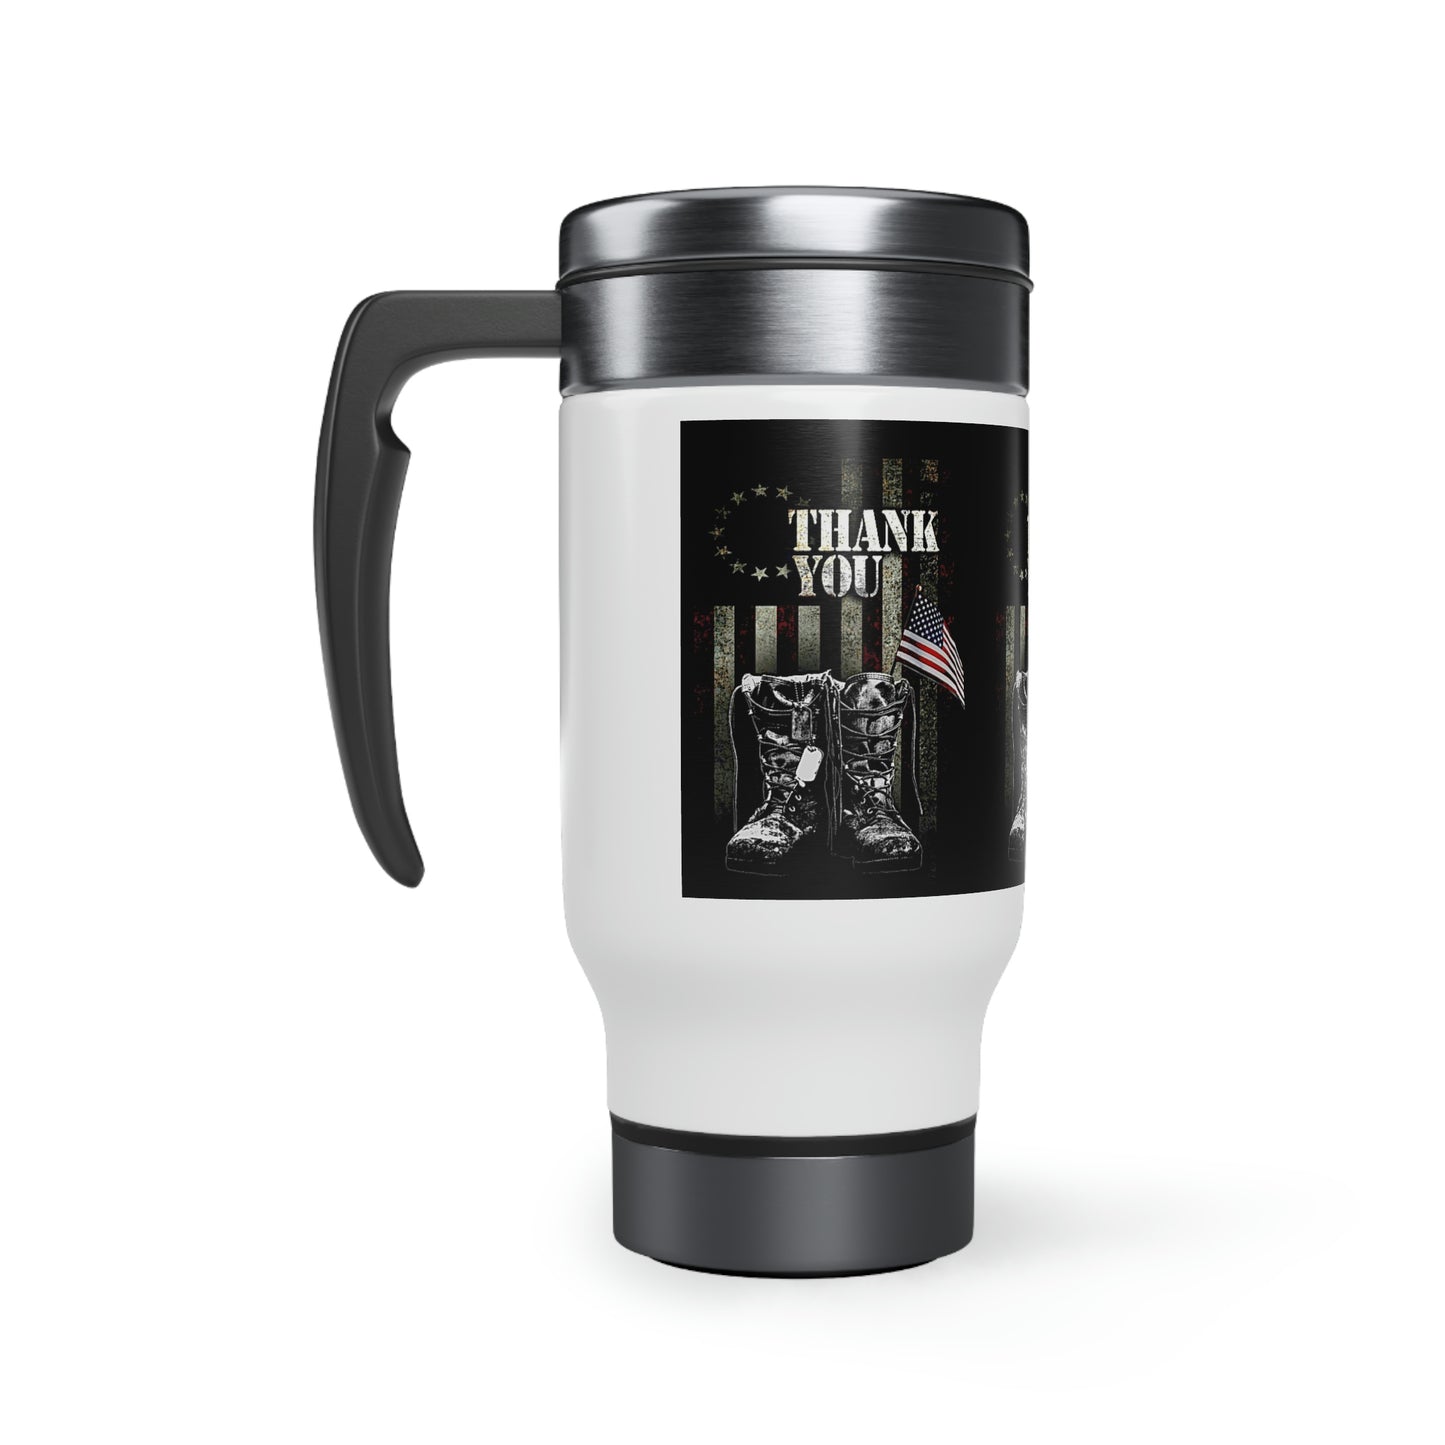 Thank You Veterans Stainless Steel Travel Mug with Handle, 14oz,